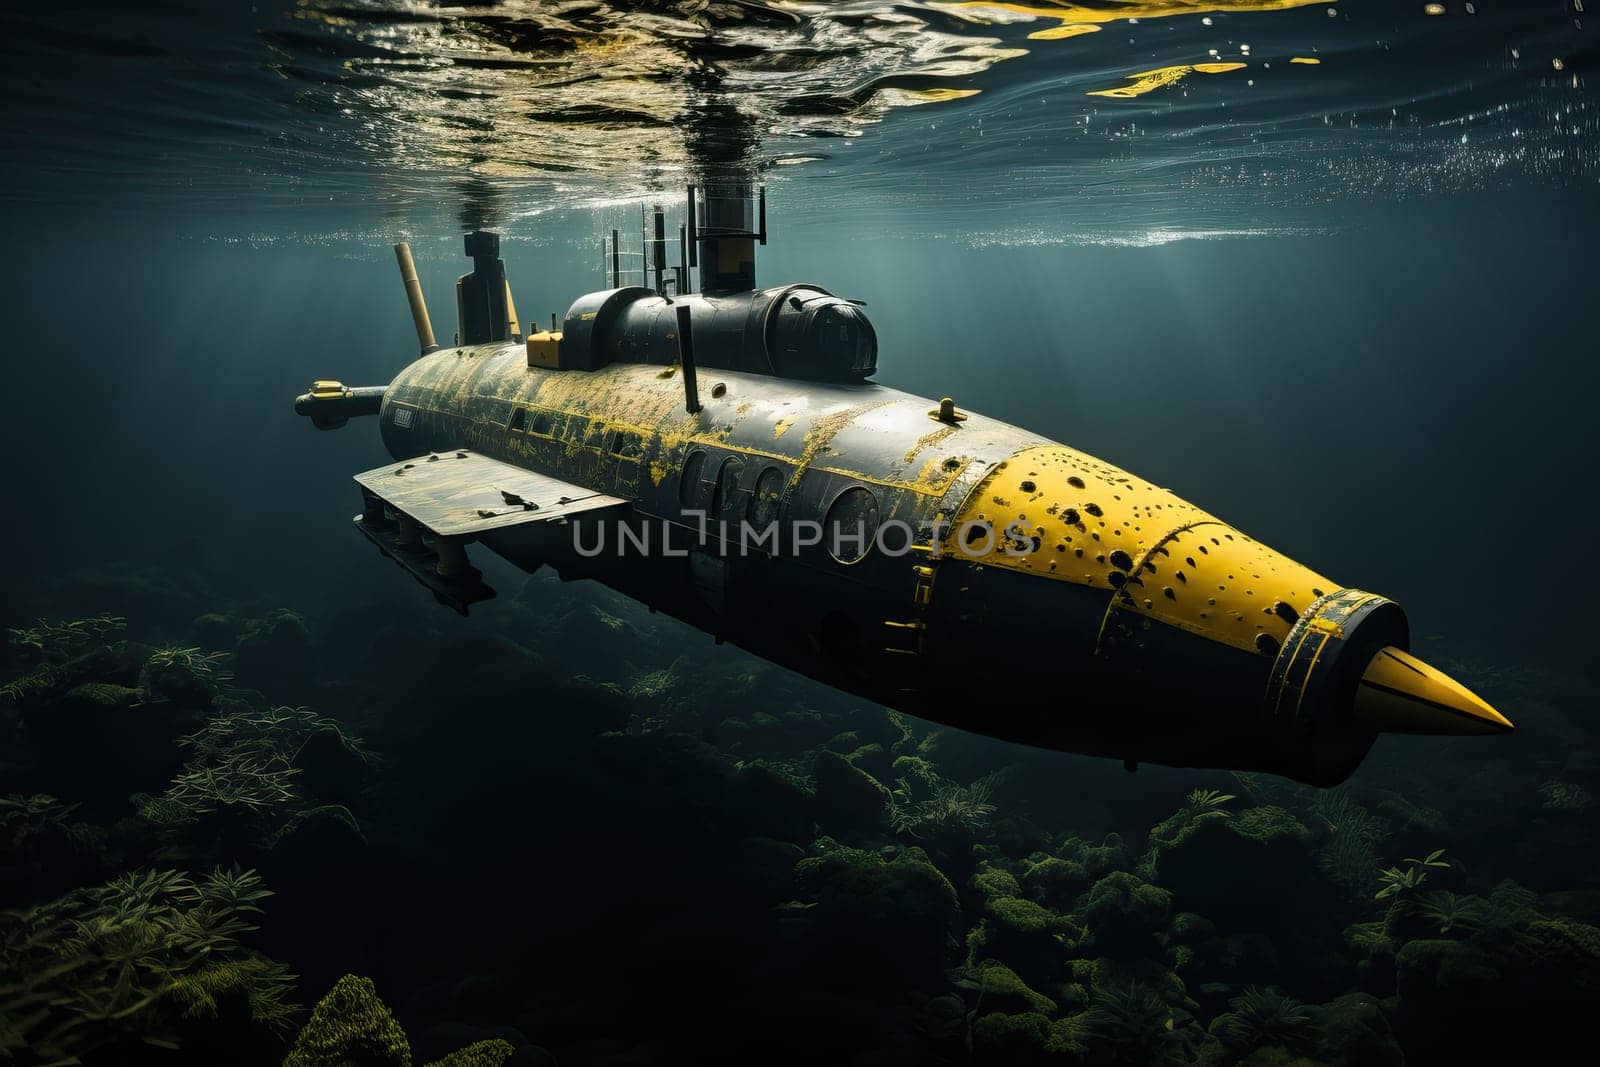 A submarine for exploring the sea and ocean under water.